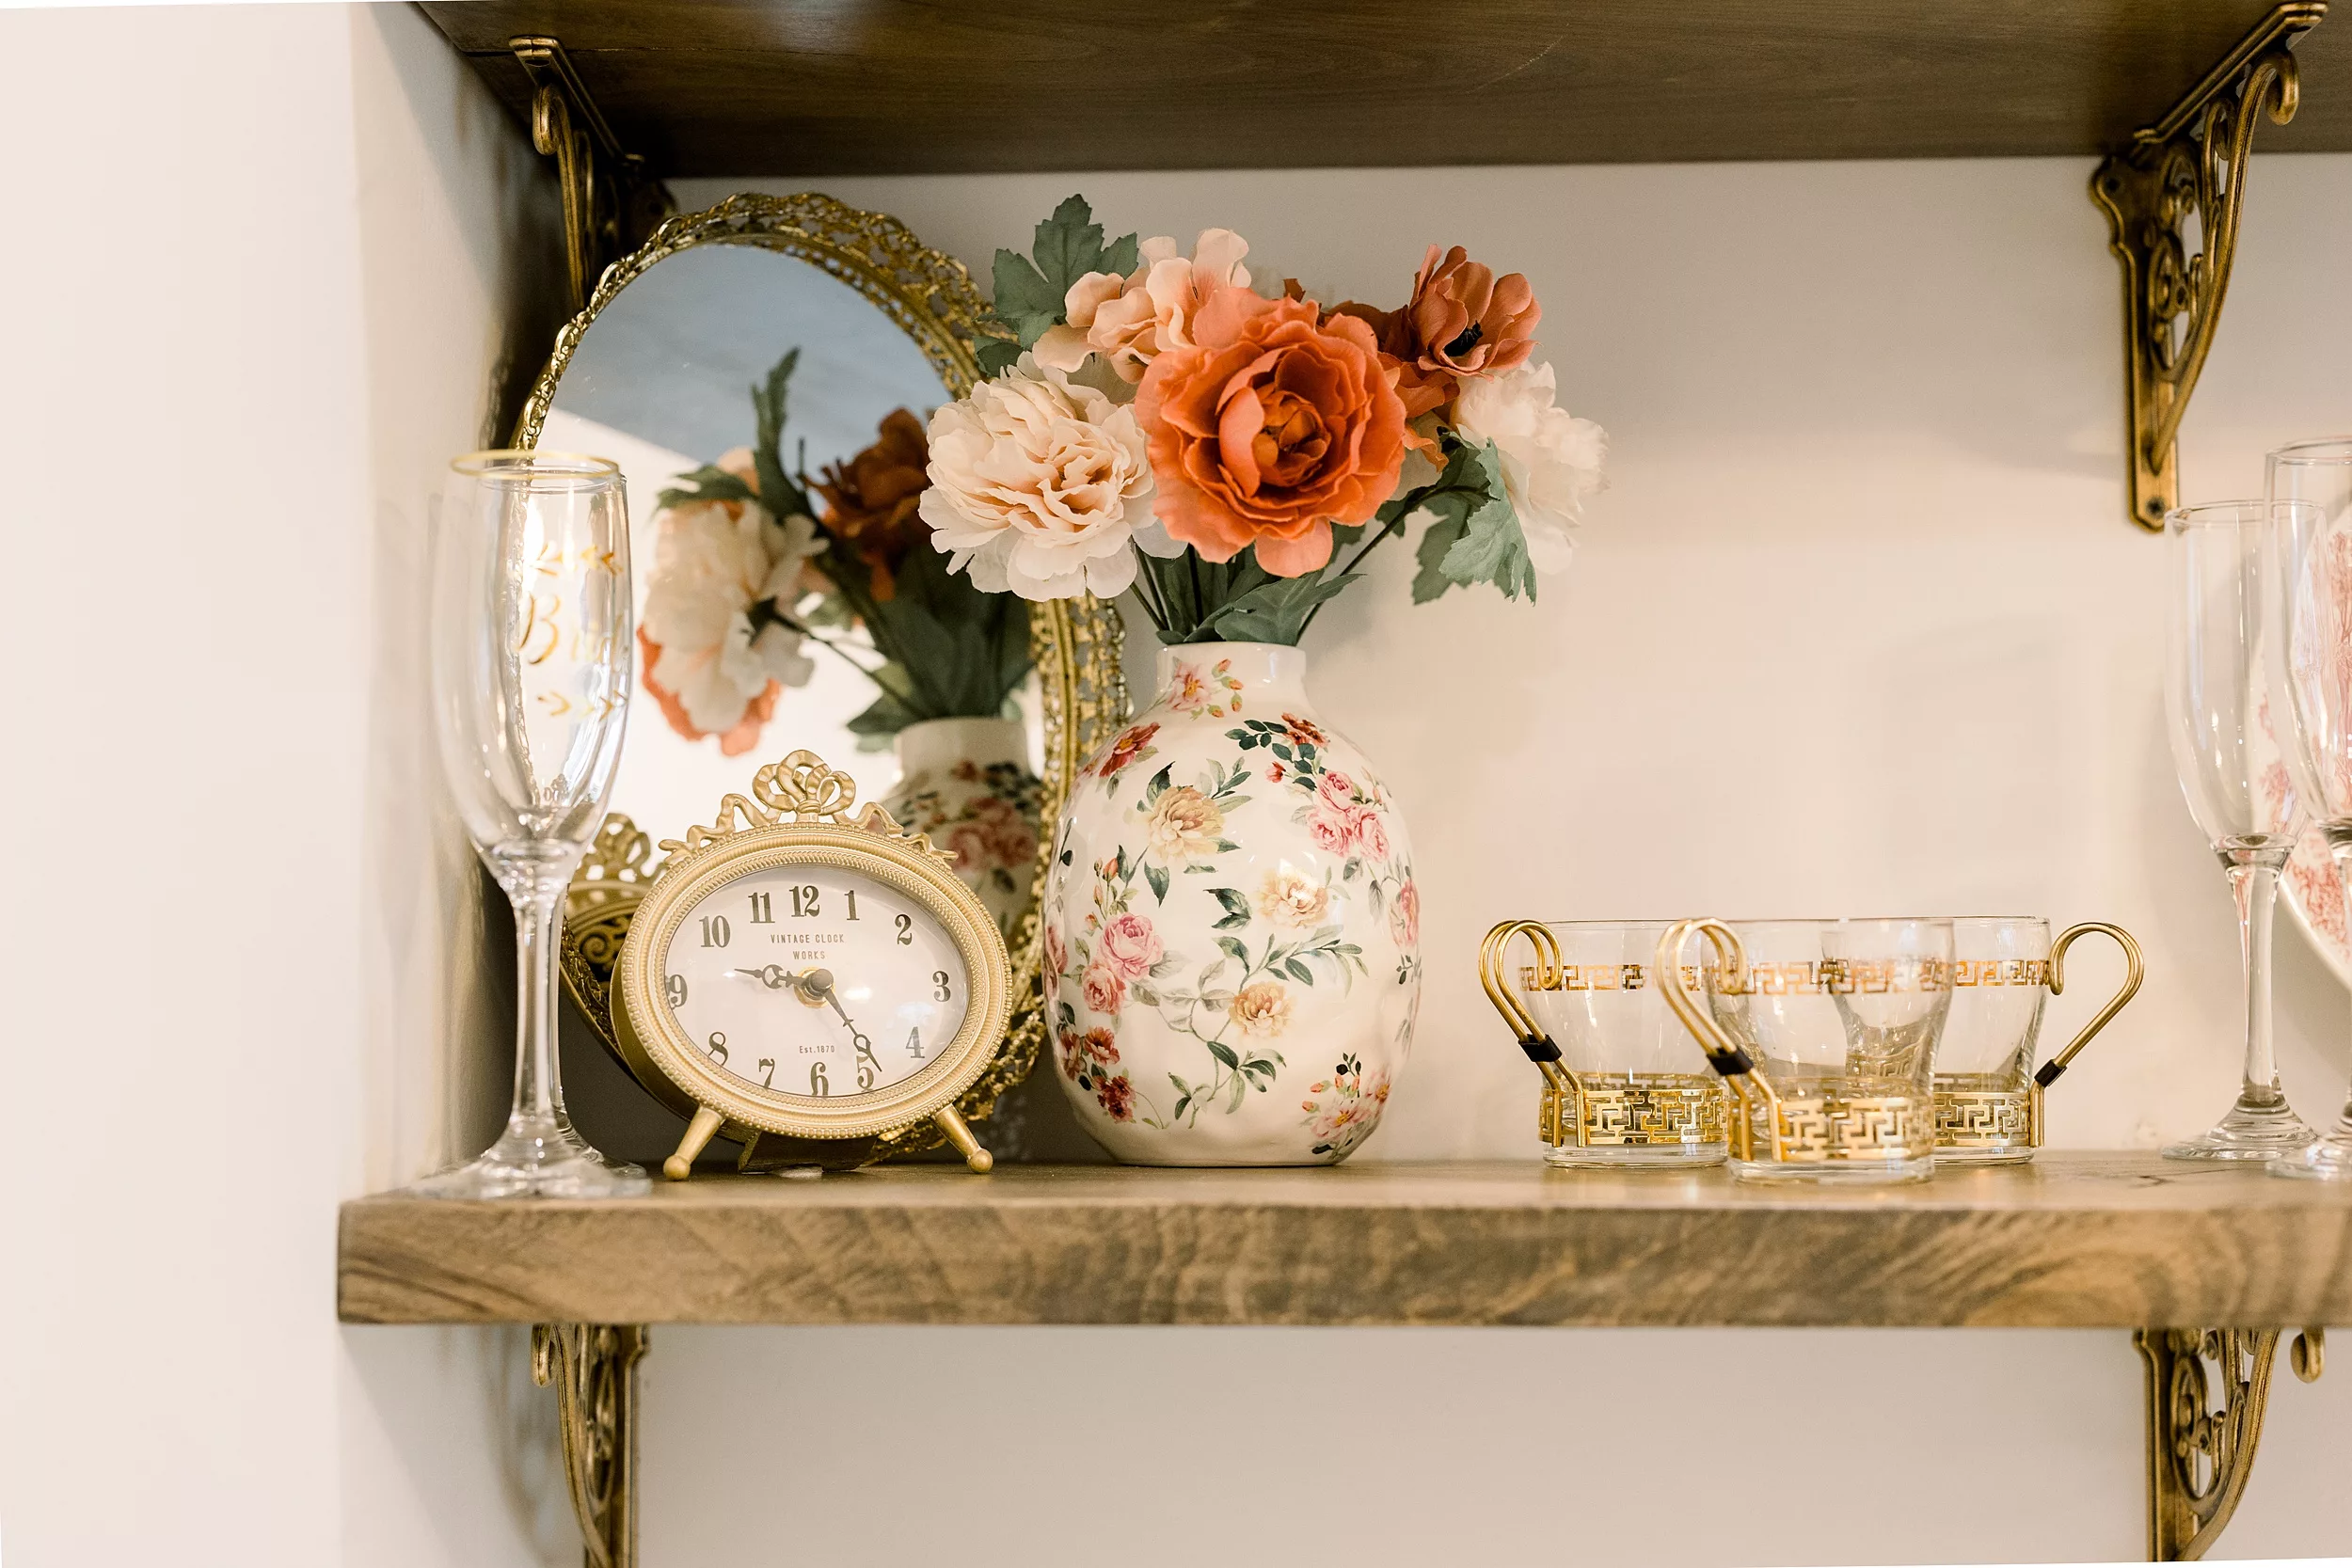 Details of an antique clock, mirror and glasses on a wooden shelf with flowers in a vase